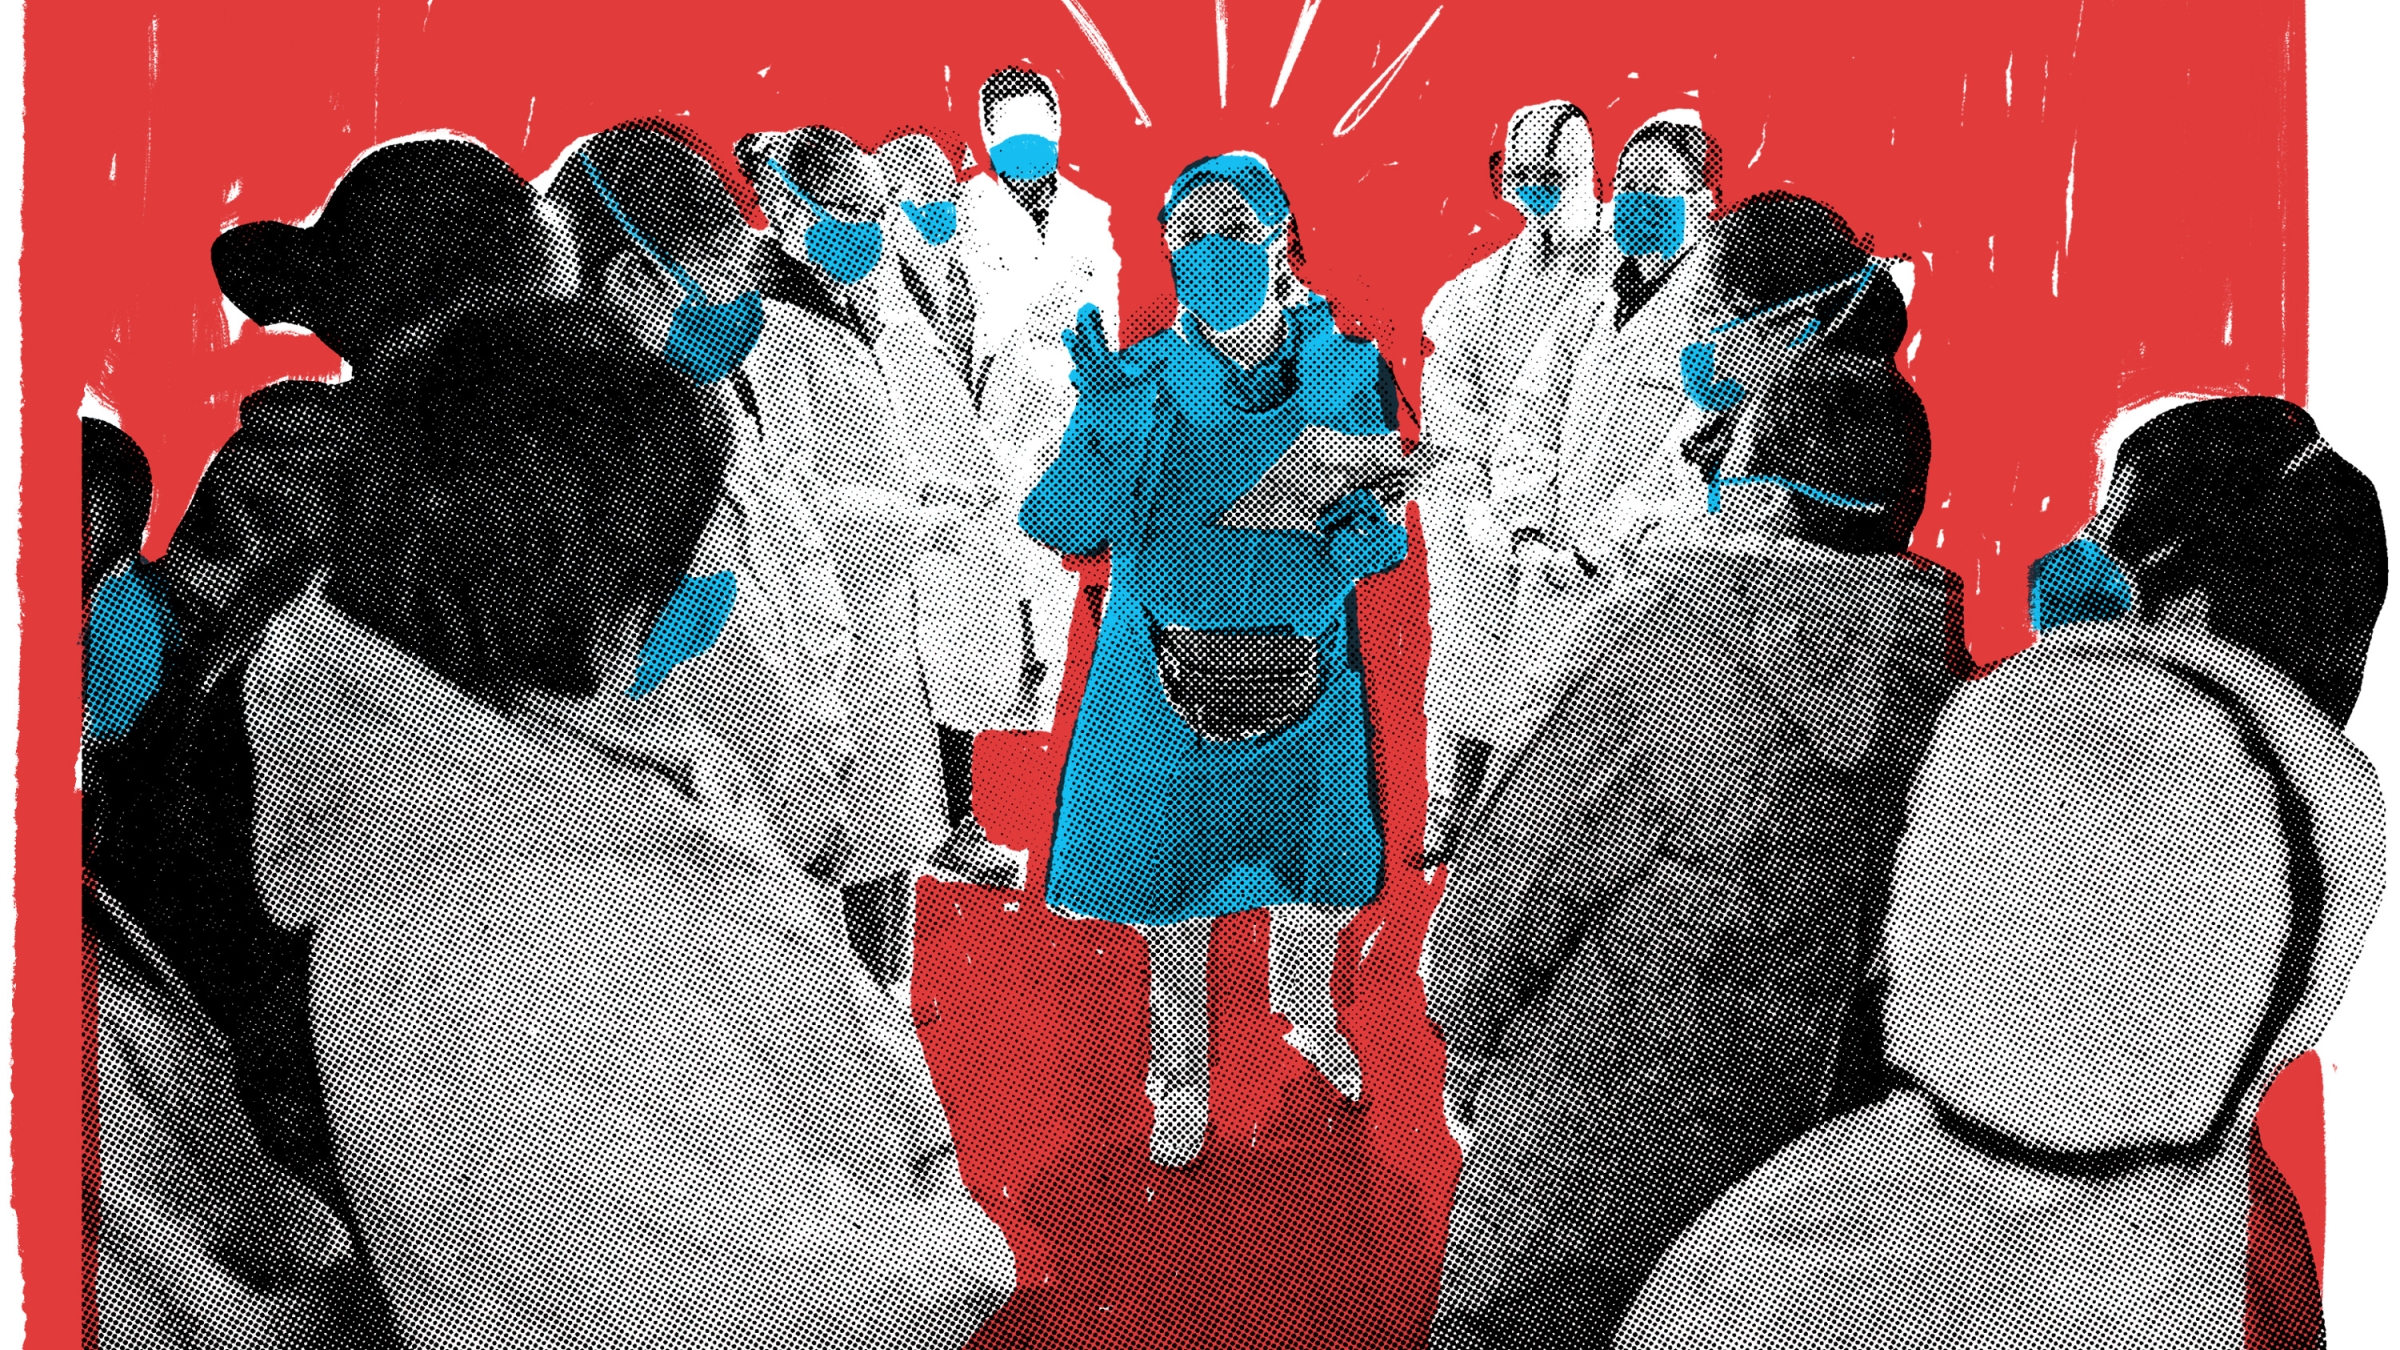 Head nurse Sun Chun, center, assigns tasks to nurses before receiving patients infected with COVID-19 at Leishenshan (Thunder God Mountain) Hospital, a temporary emergency clinic in Wuhan, China, on Feb. 8, 2020.